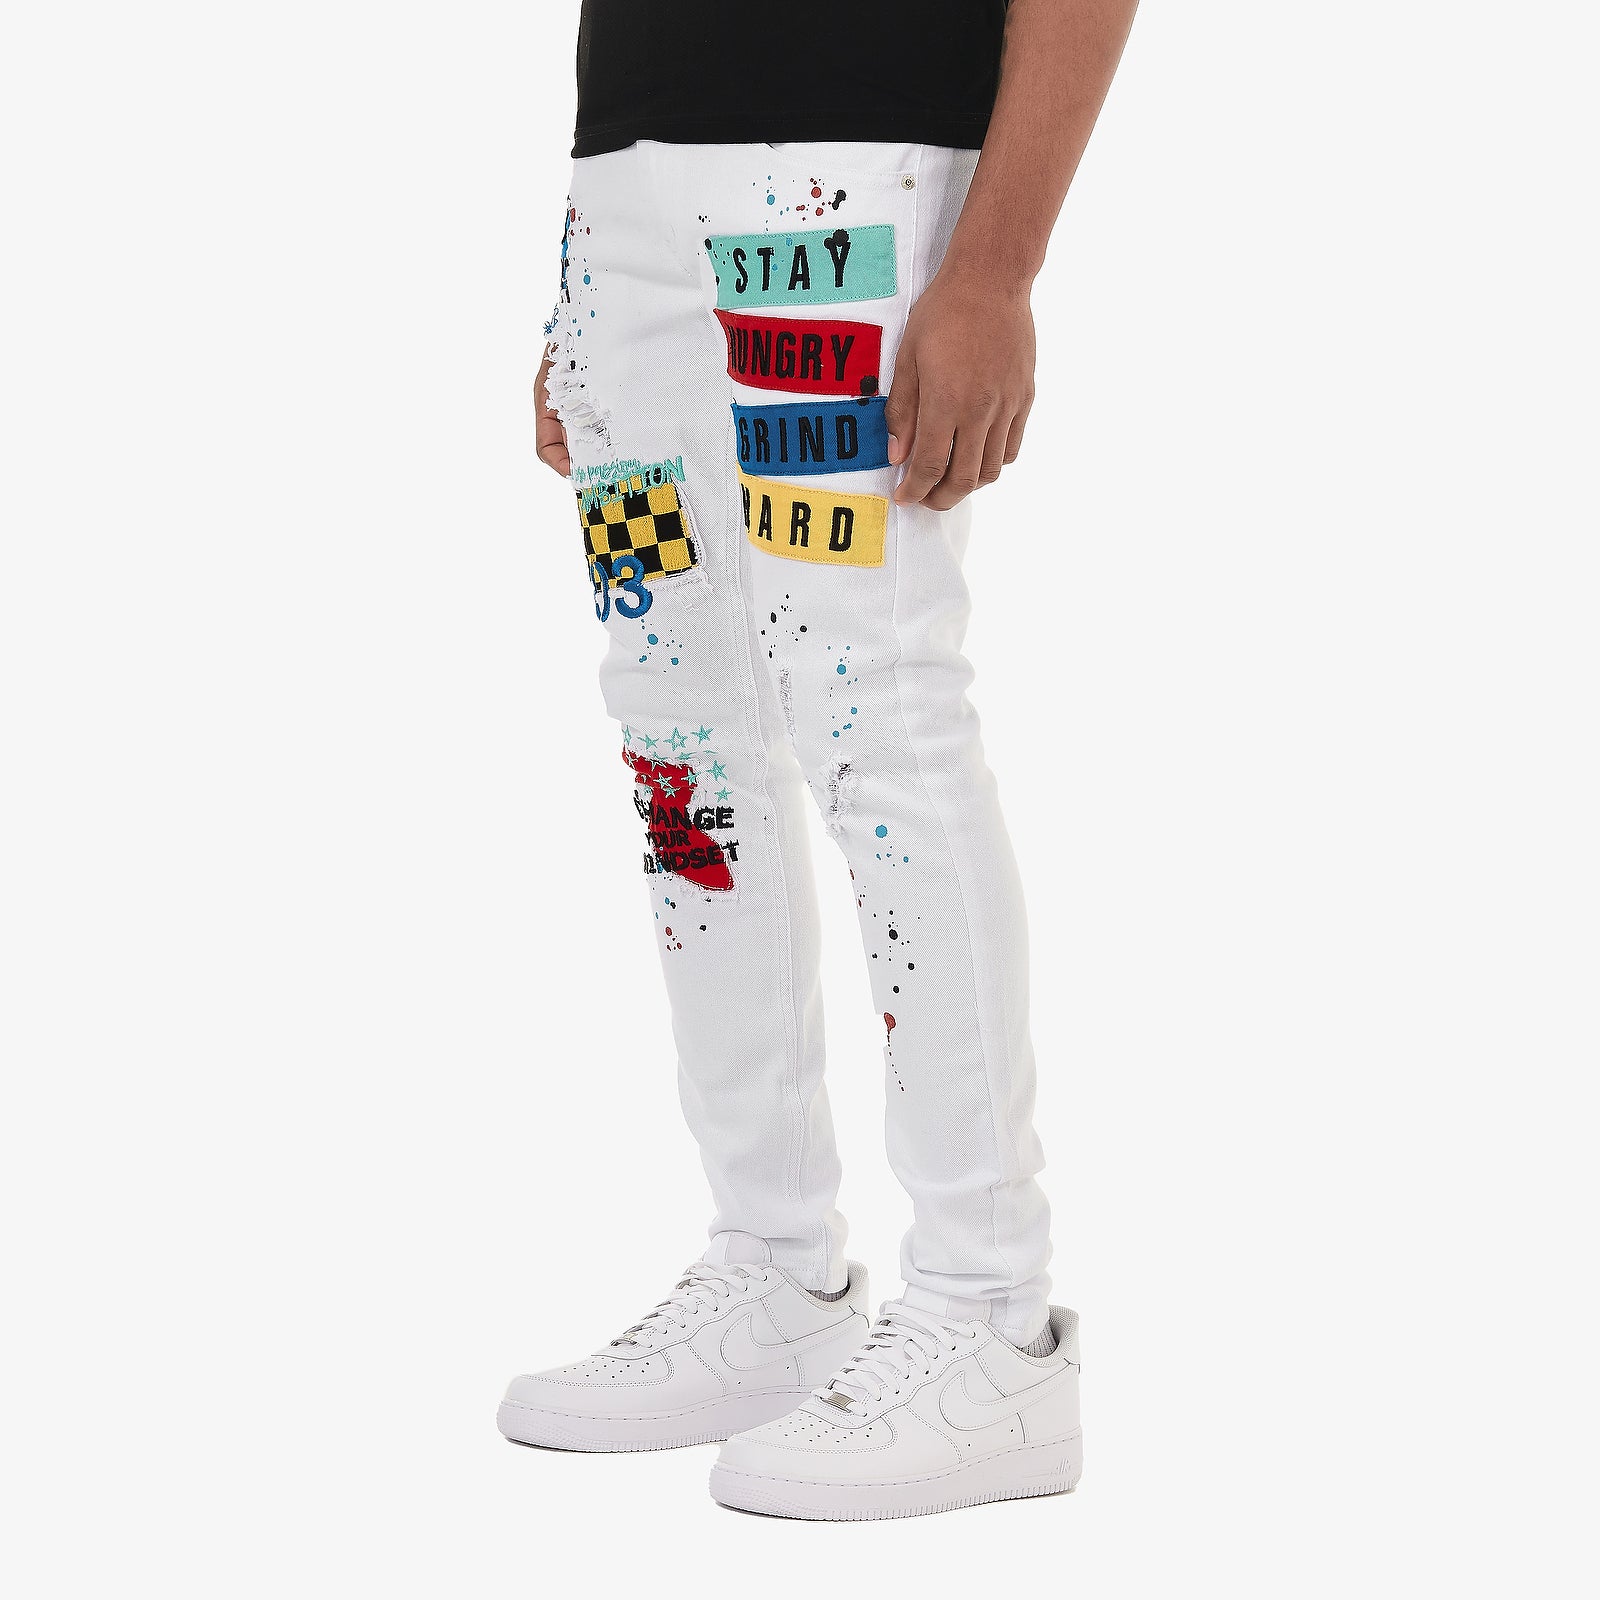 WHITE PANTS W/ COLOR PATCHES & EMBROIDERY